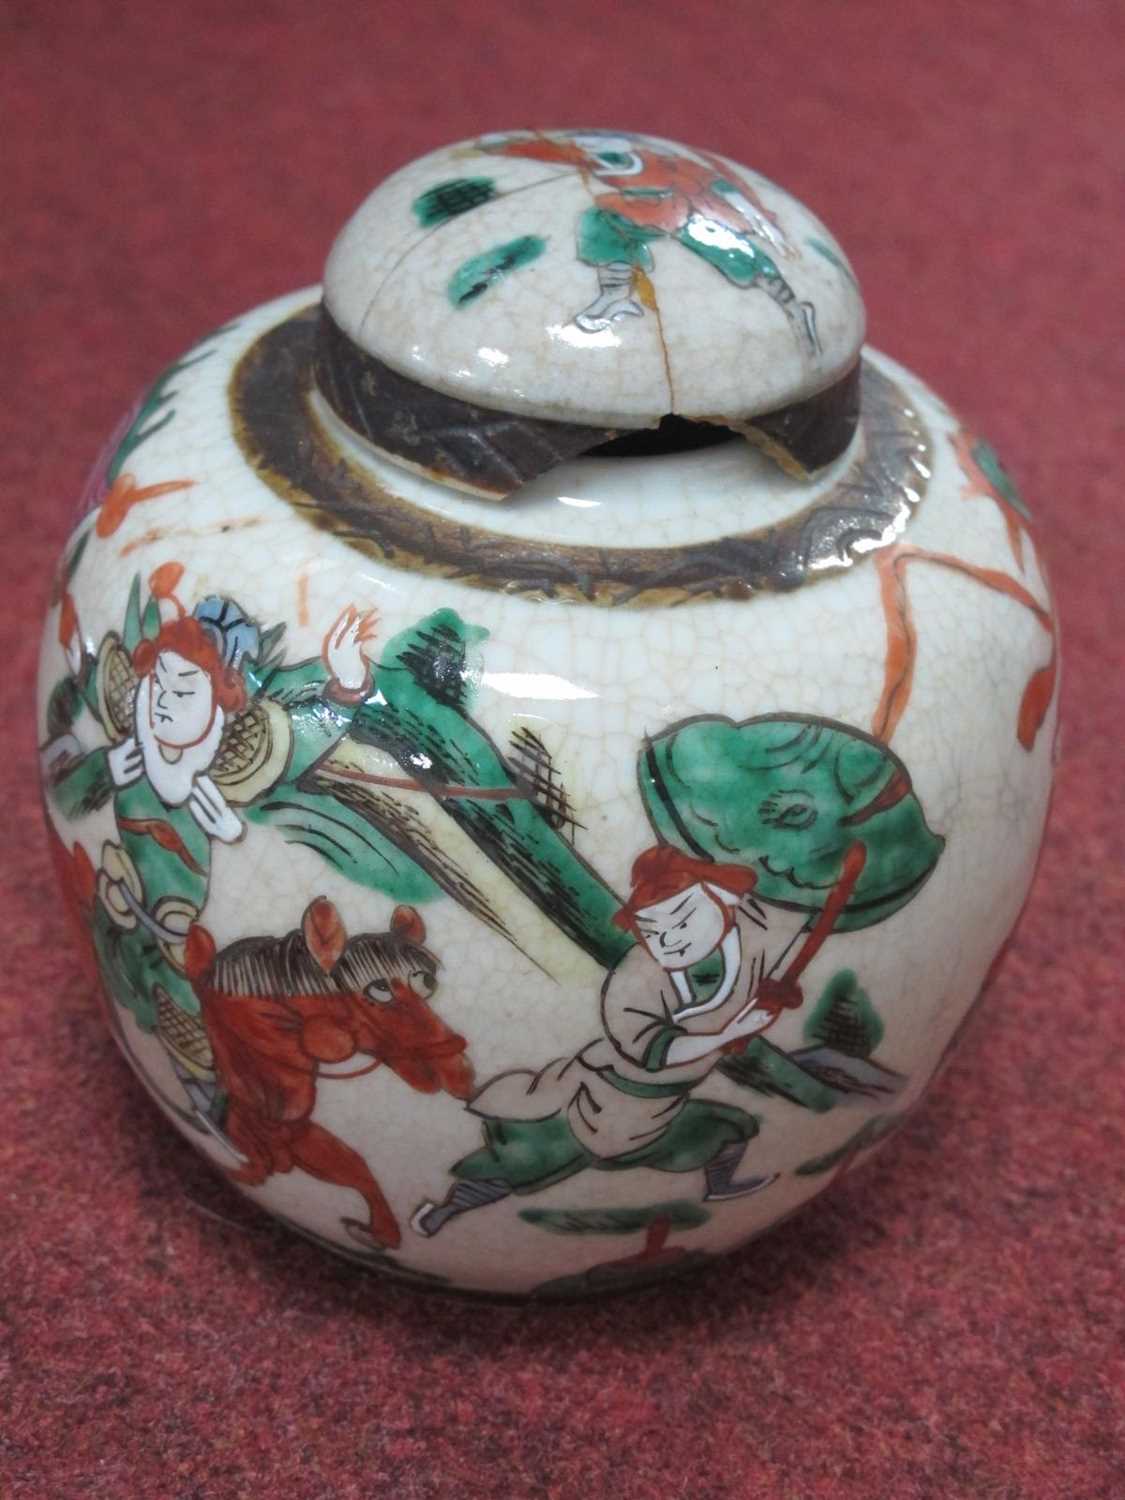 XIX Century Chinese Cantonese Tea Pot, Japanese ginger jar, etc:- One Tray Teapot with some rough - Image 12 of 12